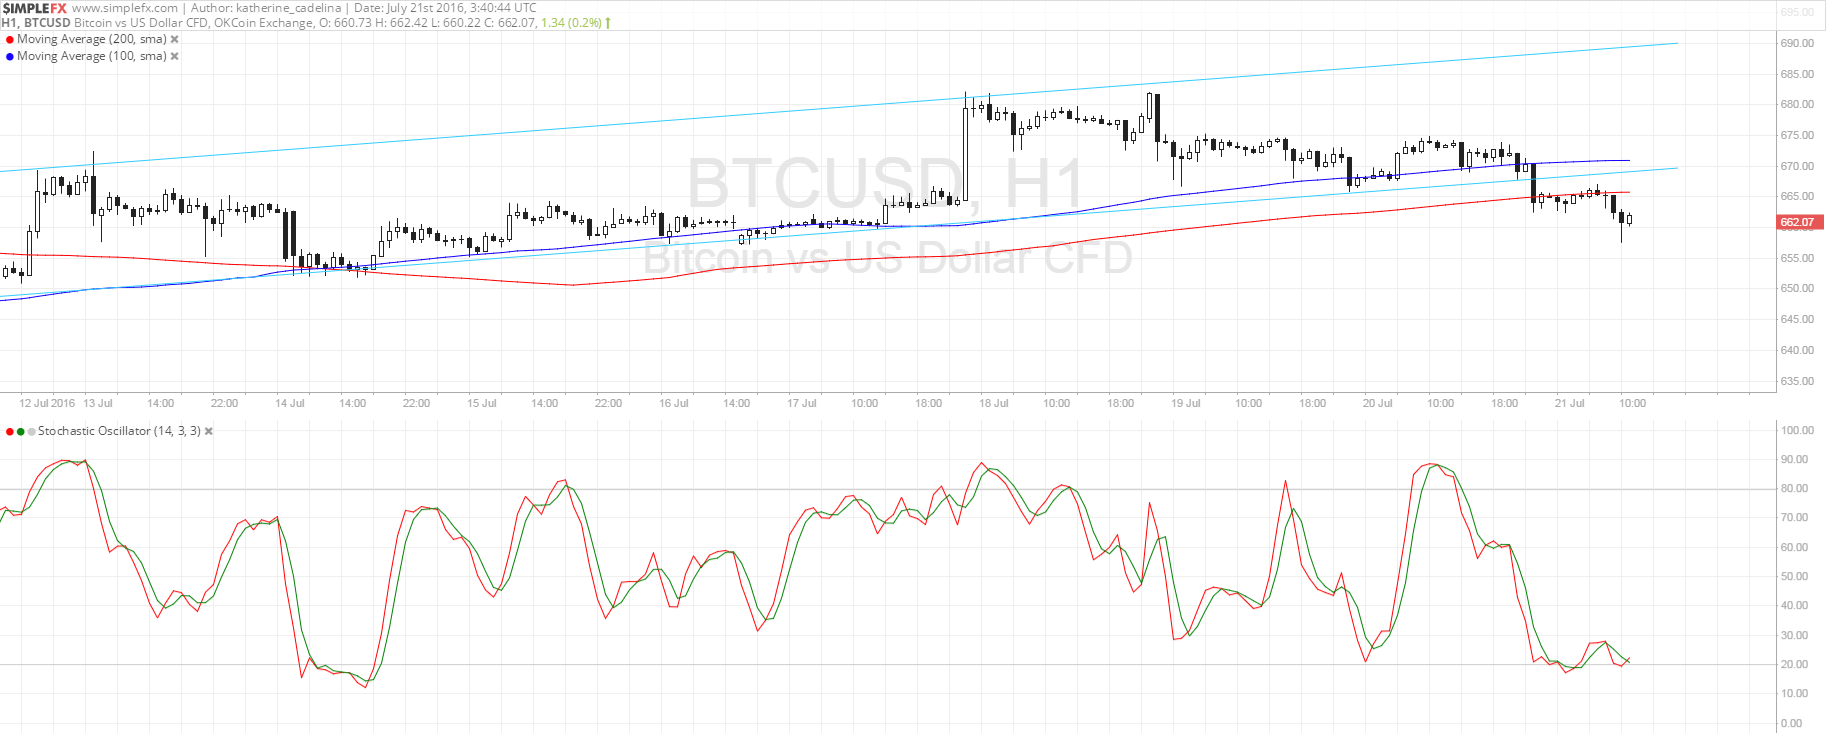 Bitcoin Price Technical Analysis for 07/21/2016 - Bears Gaining Control!